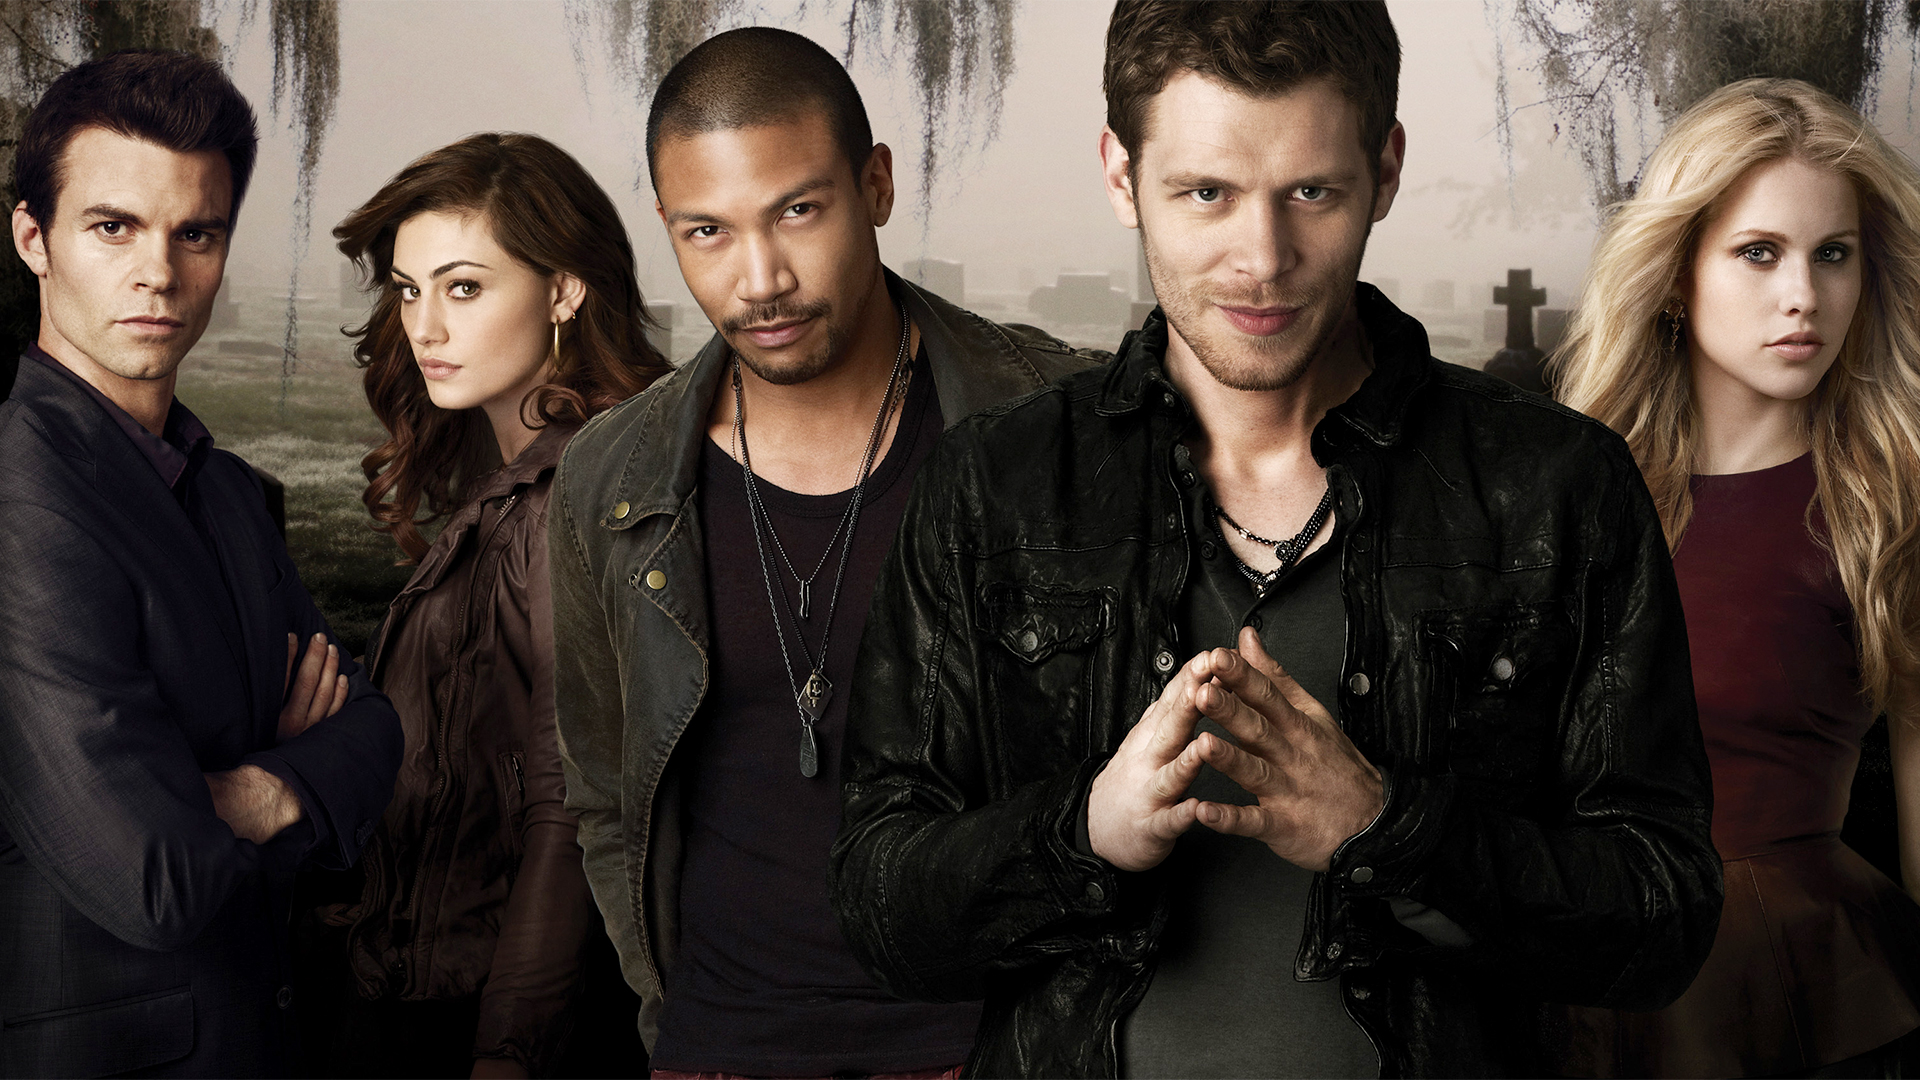 TV and Enneagram — The Originals: Kol Mikaelson - Type 7w8